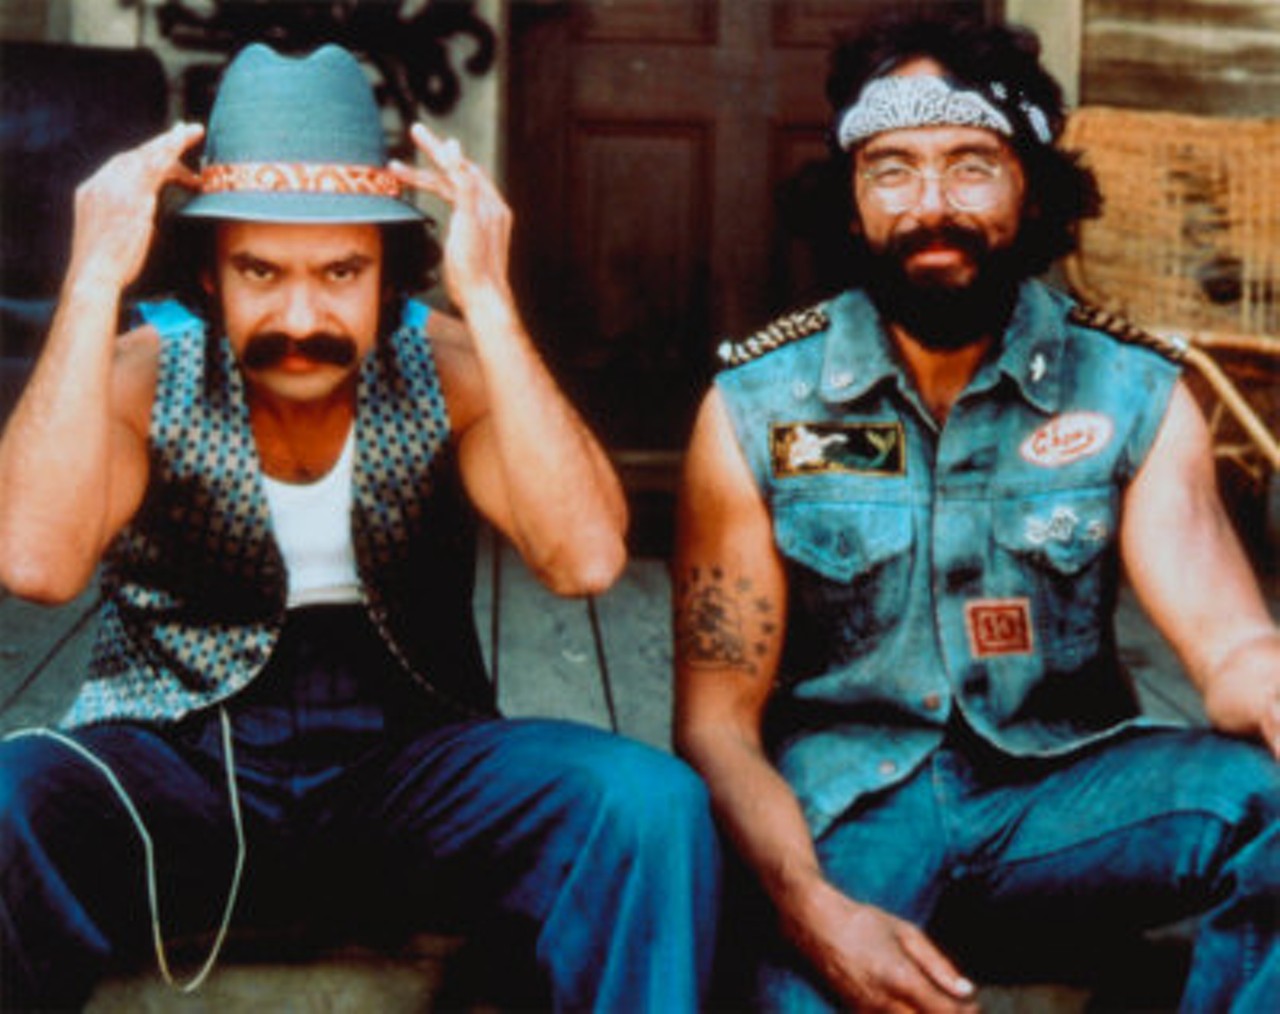 Cheech and Chong. The comedy duo had a contentious falling-out in the '80s, but they and their facial hair are set to return to with the "Cheech and Chong Light Up America/Canada" tour this year. Burn one.